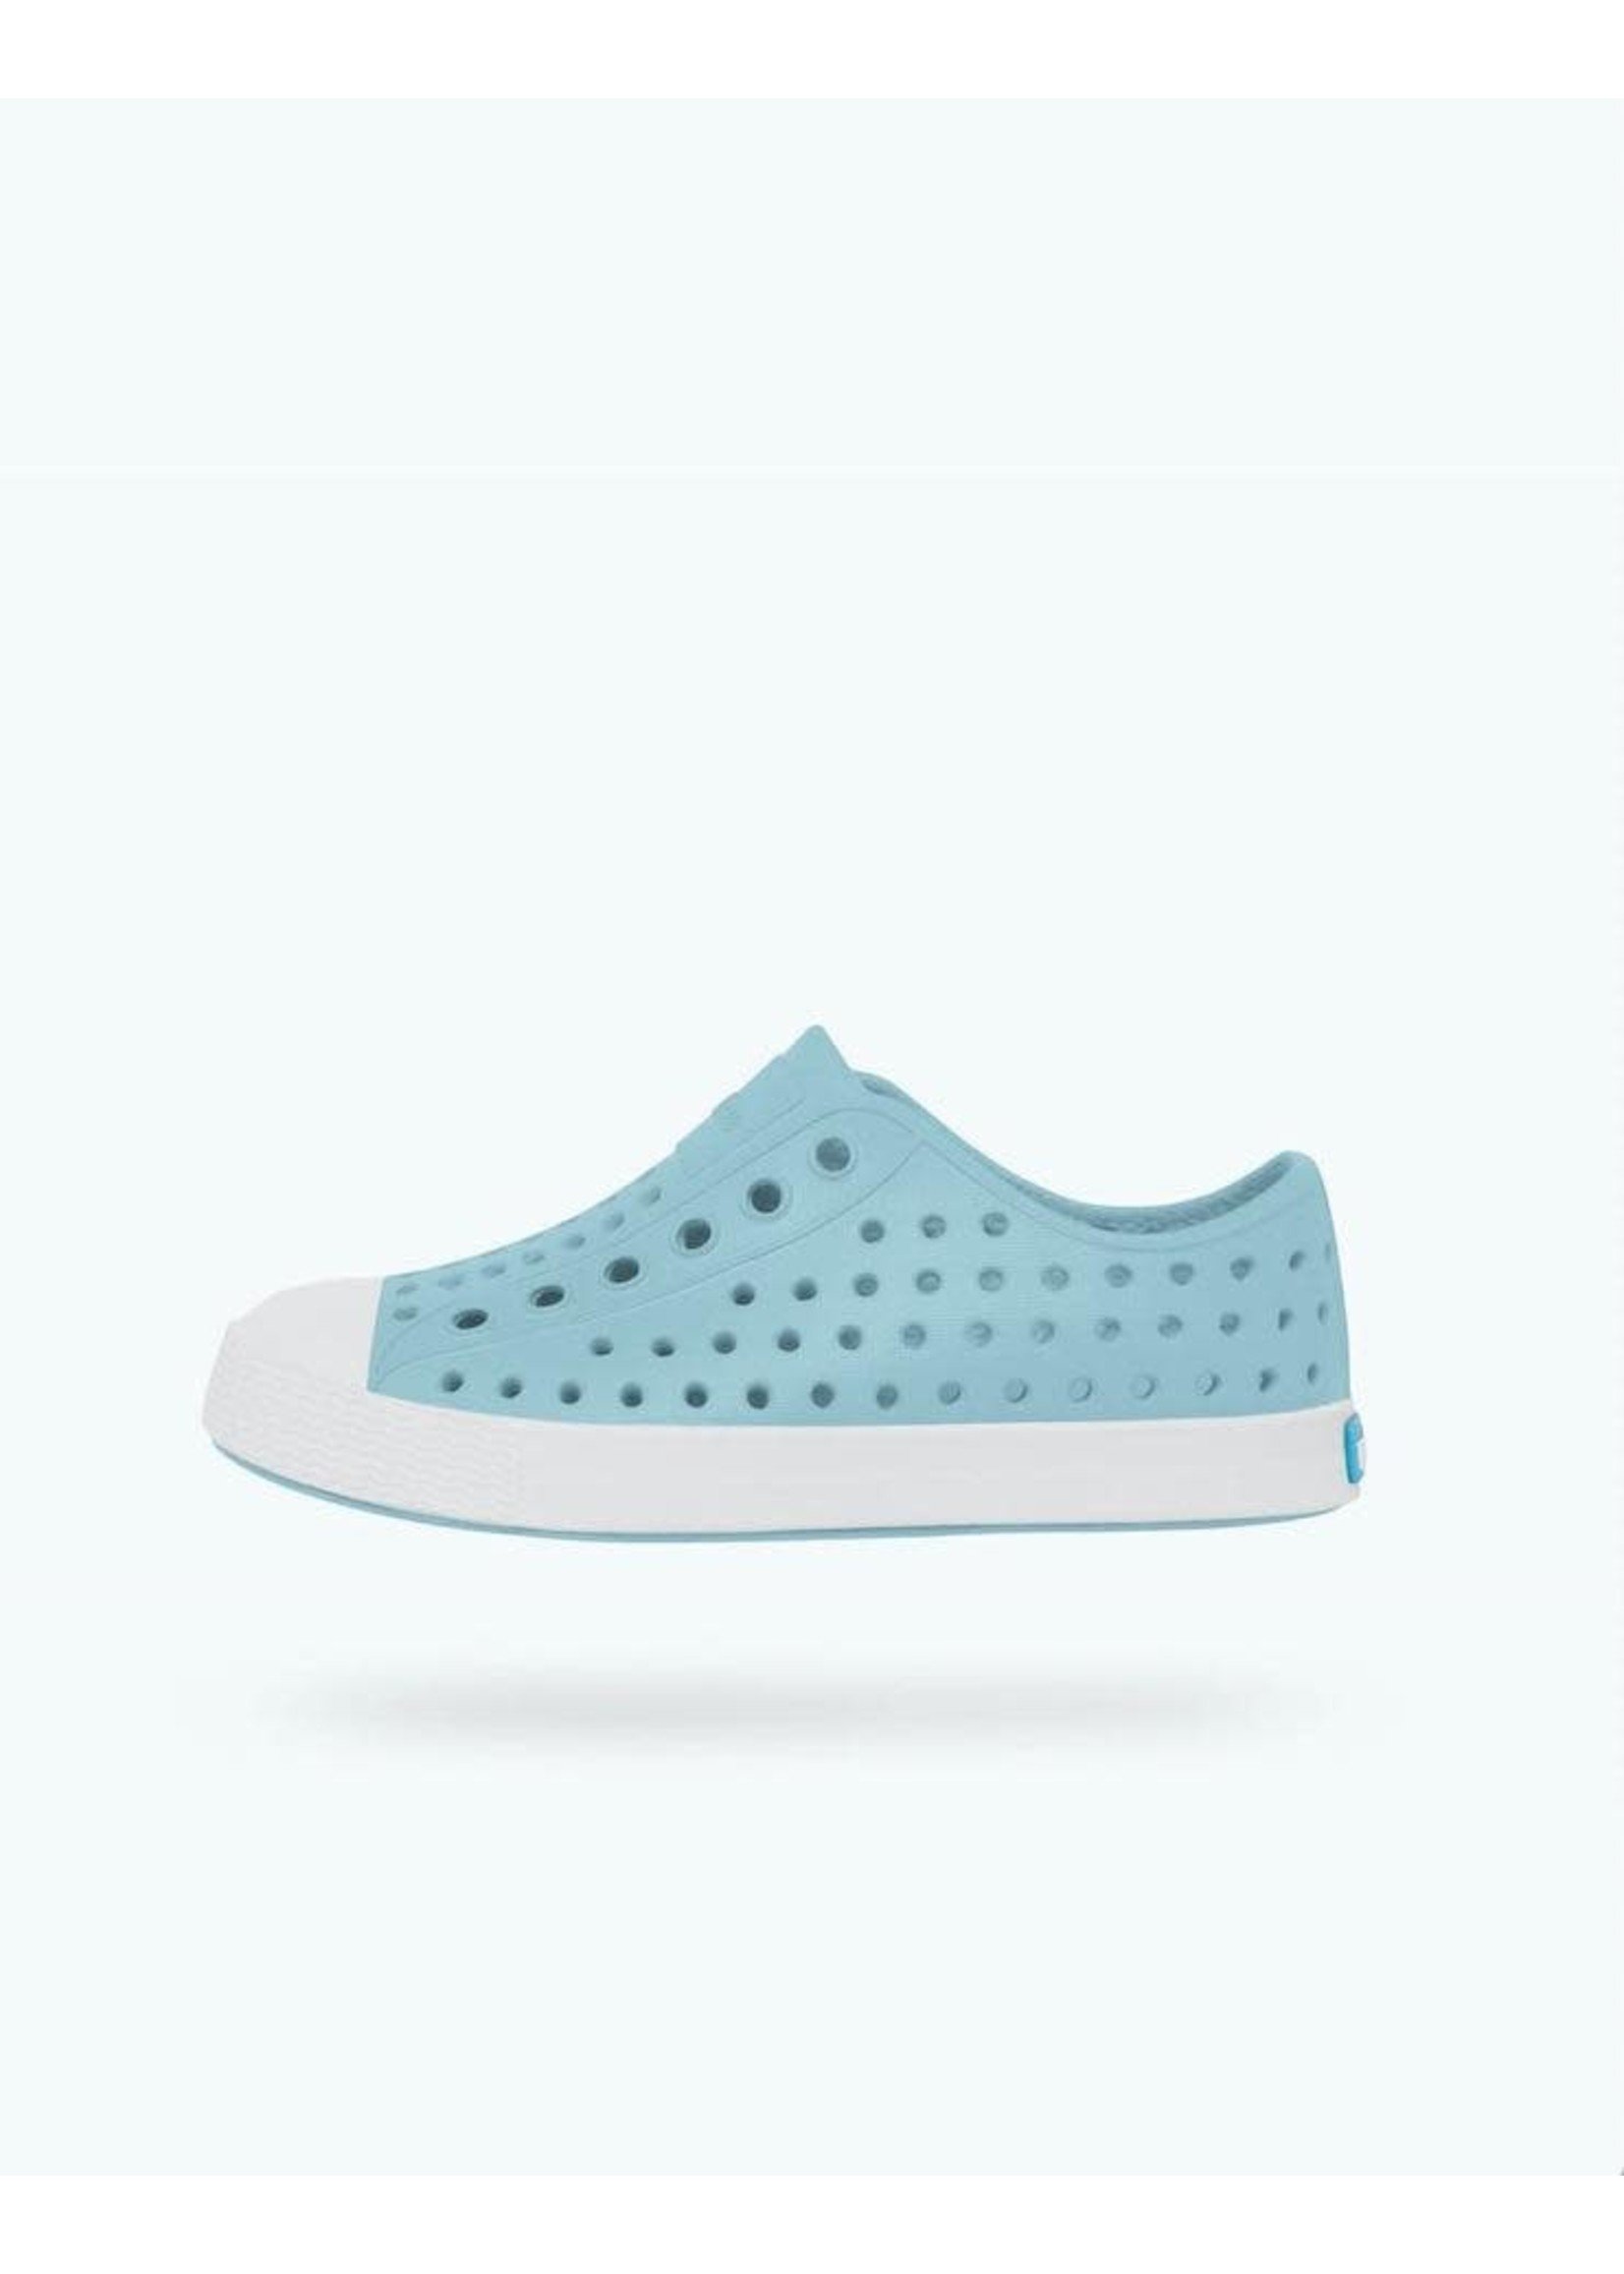 Native Shoes Native Shoes, Jefferson Youth / Junior Sky Blue/ Shell White